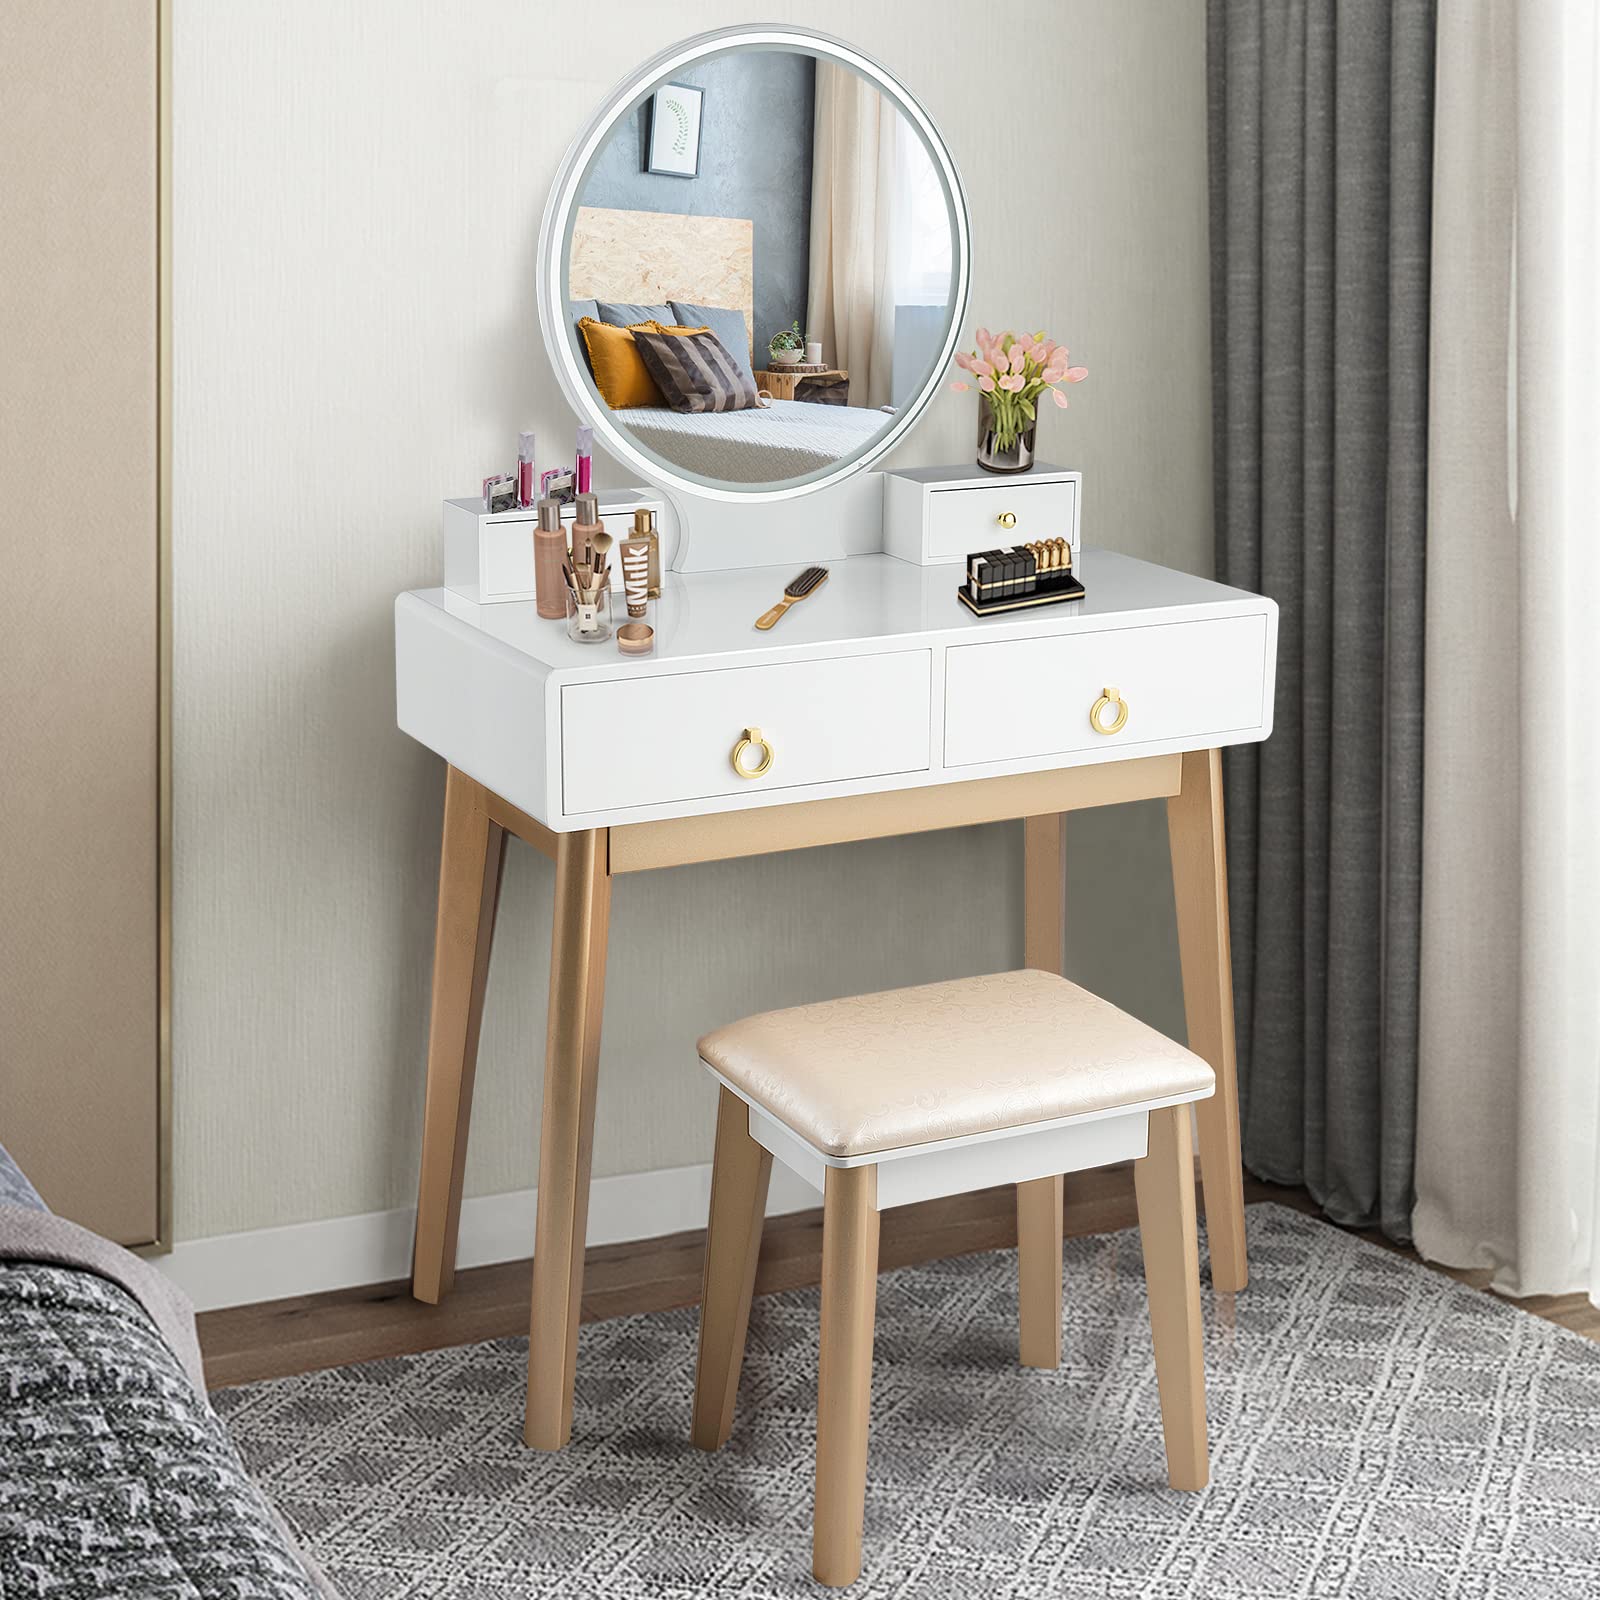 Designer Bedroom Makeup Table With Mirror, Stool, And Storage Cabinet  Stylish Ikea Home Furniture For Bedrooms From Hvzm, $744.03 | DHgate.Com